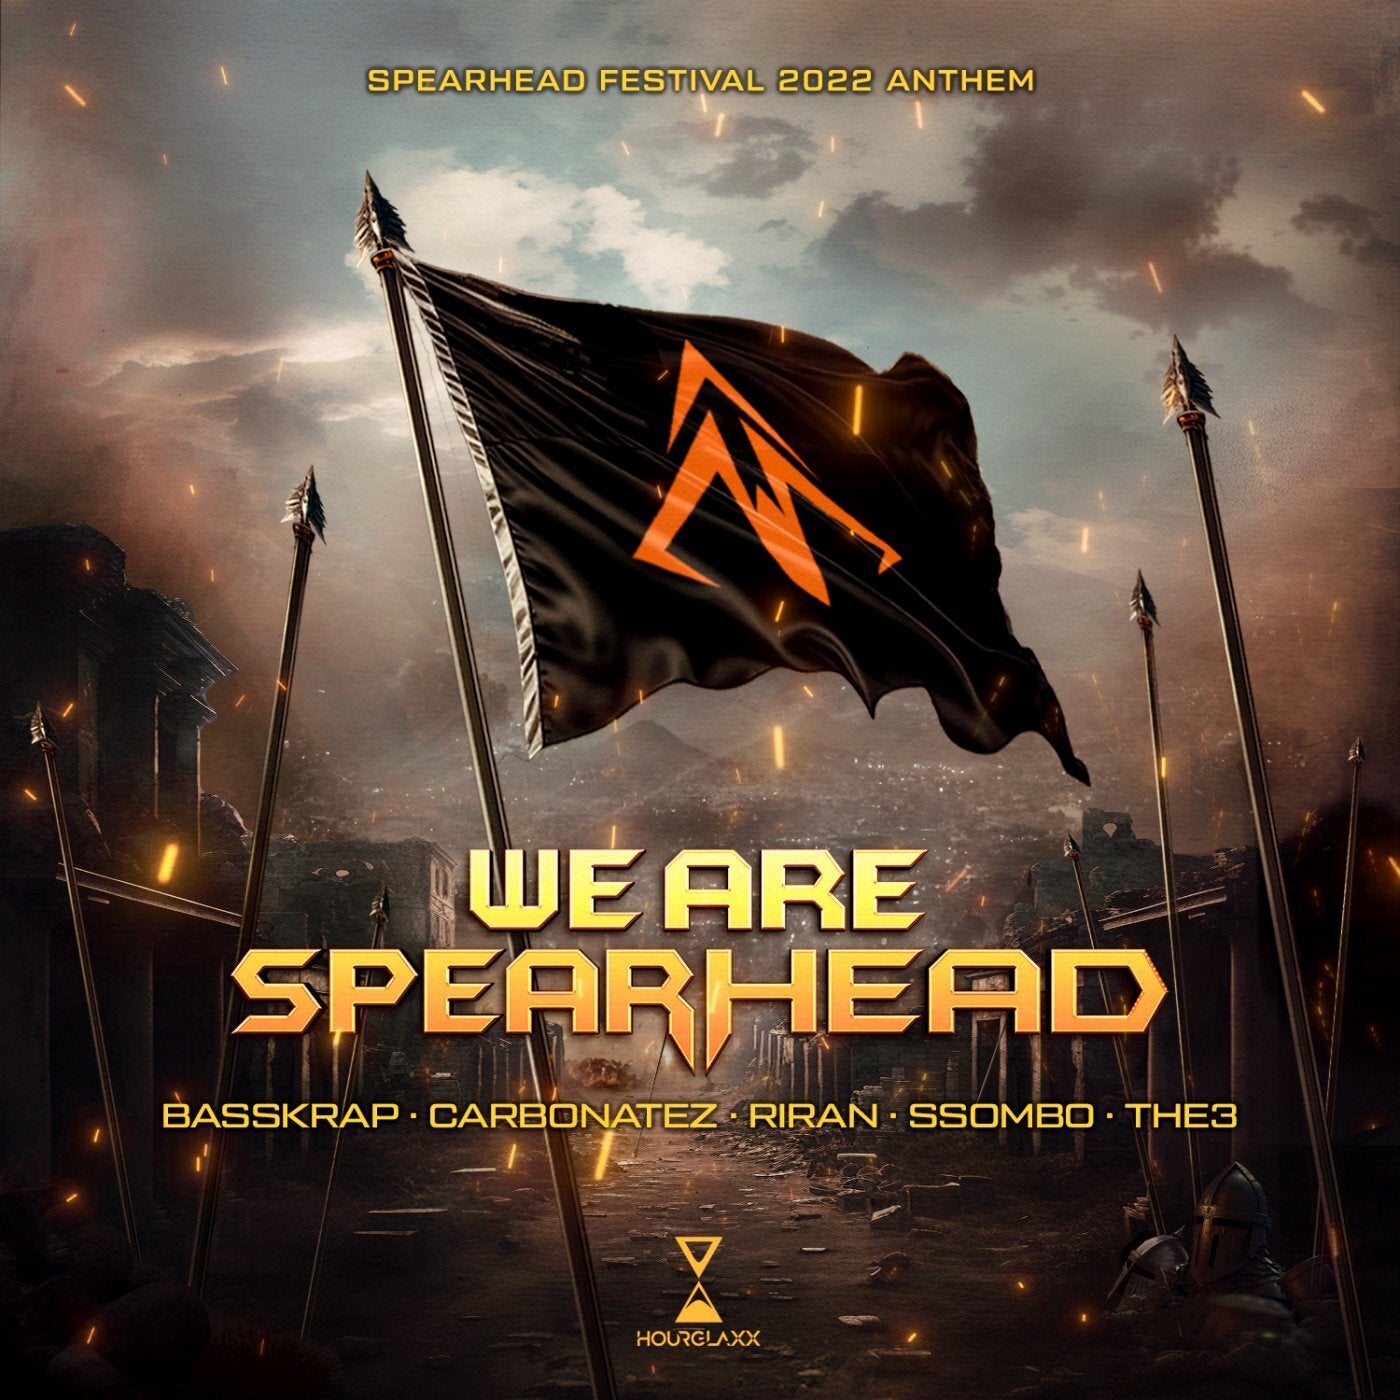 We Are Speahead (Spearhead Festival 2022 Anthem) (Radio Edit) by RiraN,  Ssombo, The3, Carbonatez, BASSKRAP on Beatport